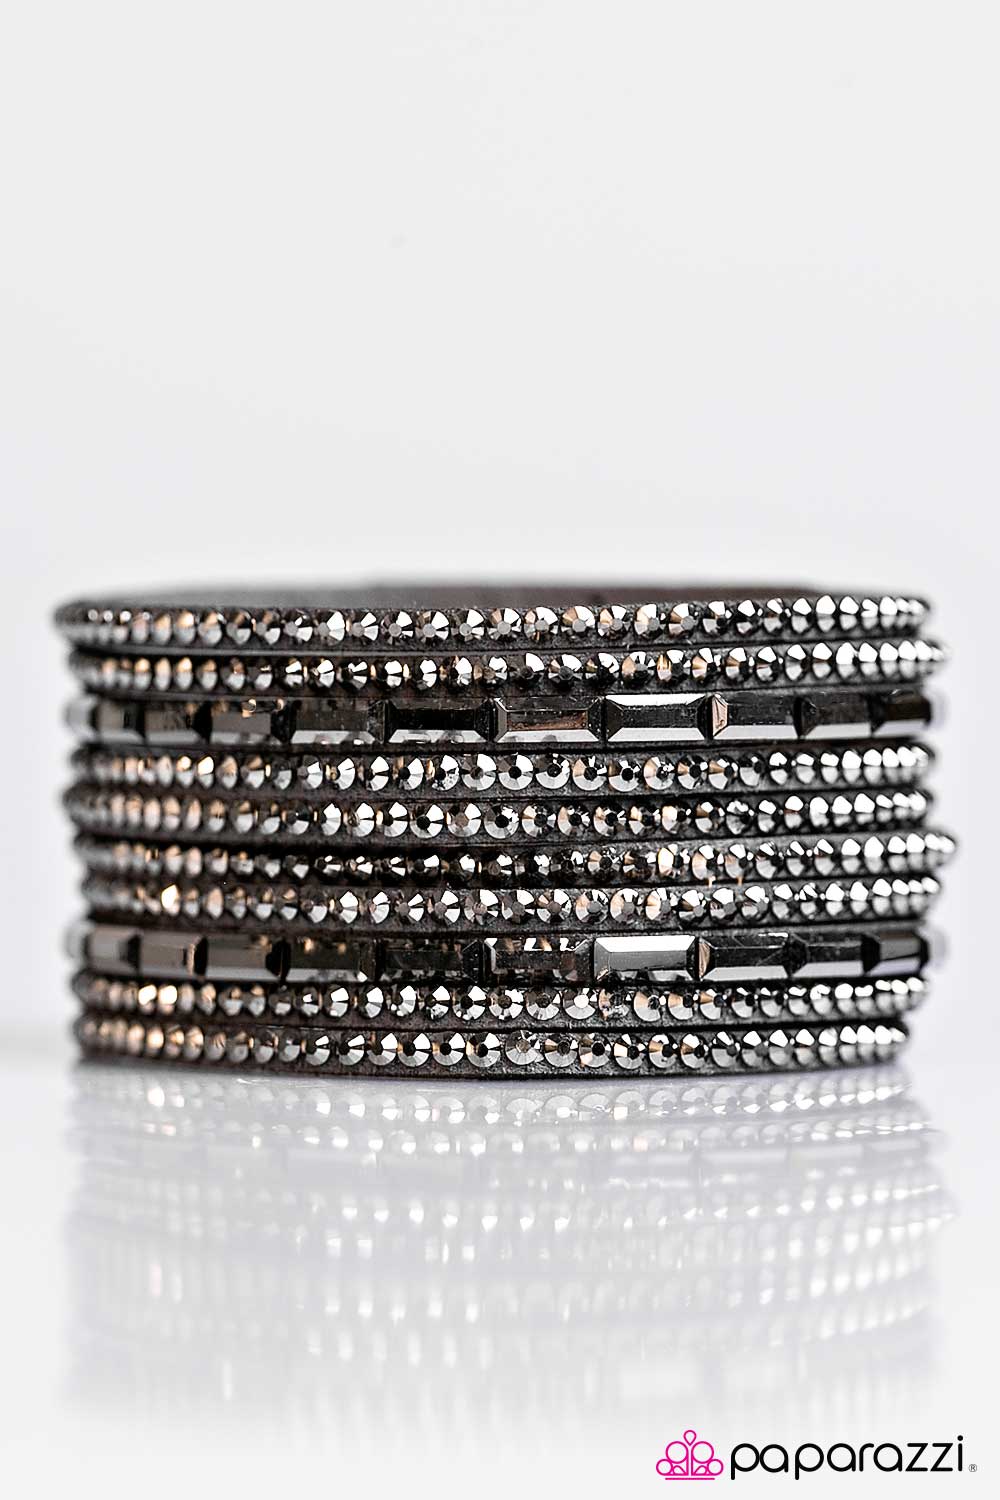 Paparazzi Accessories Name Your Price - Silver Bracelet